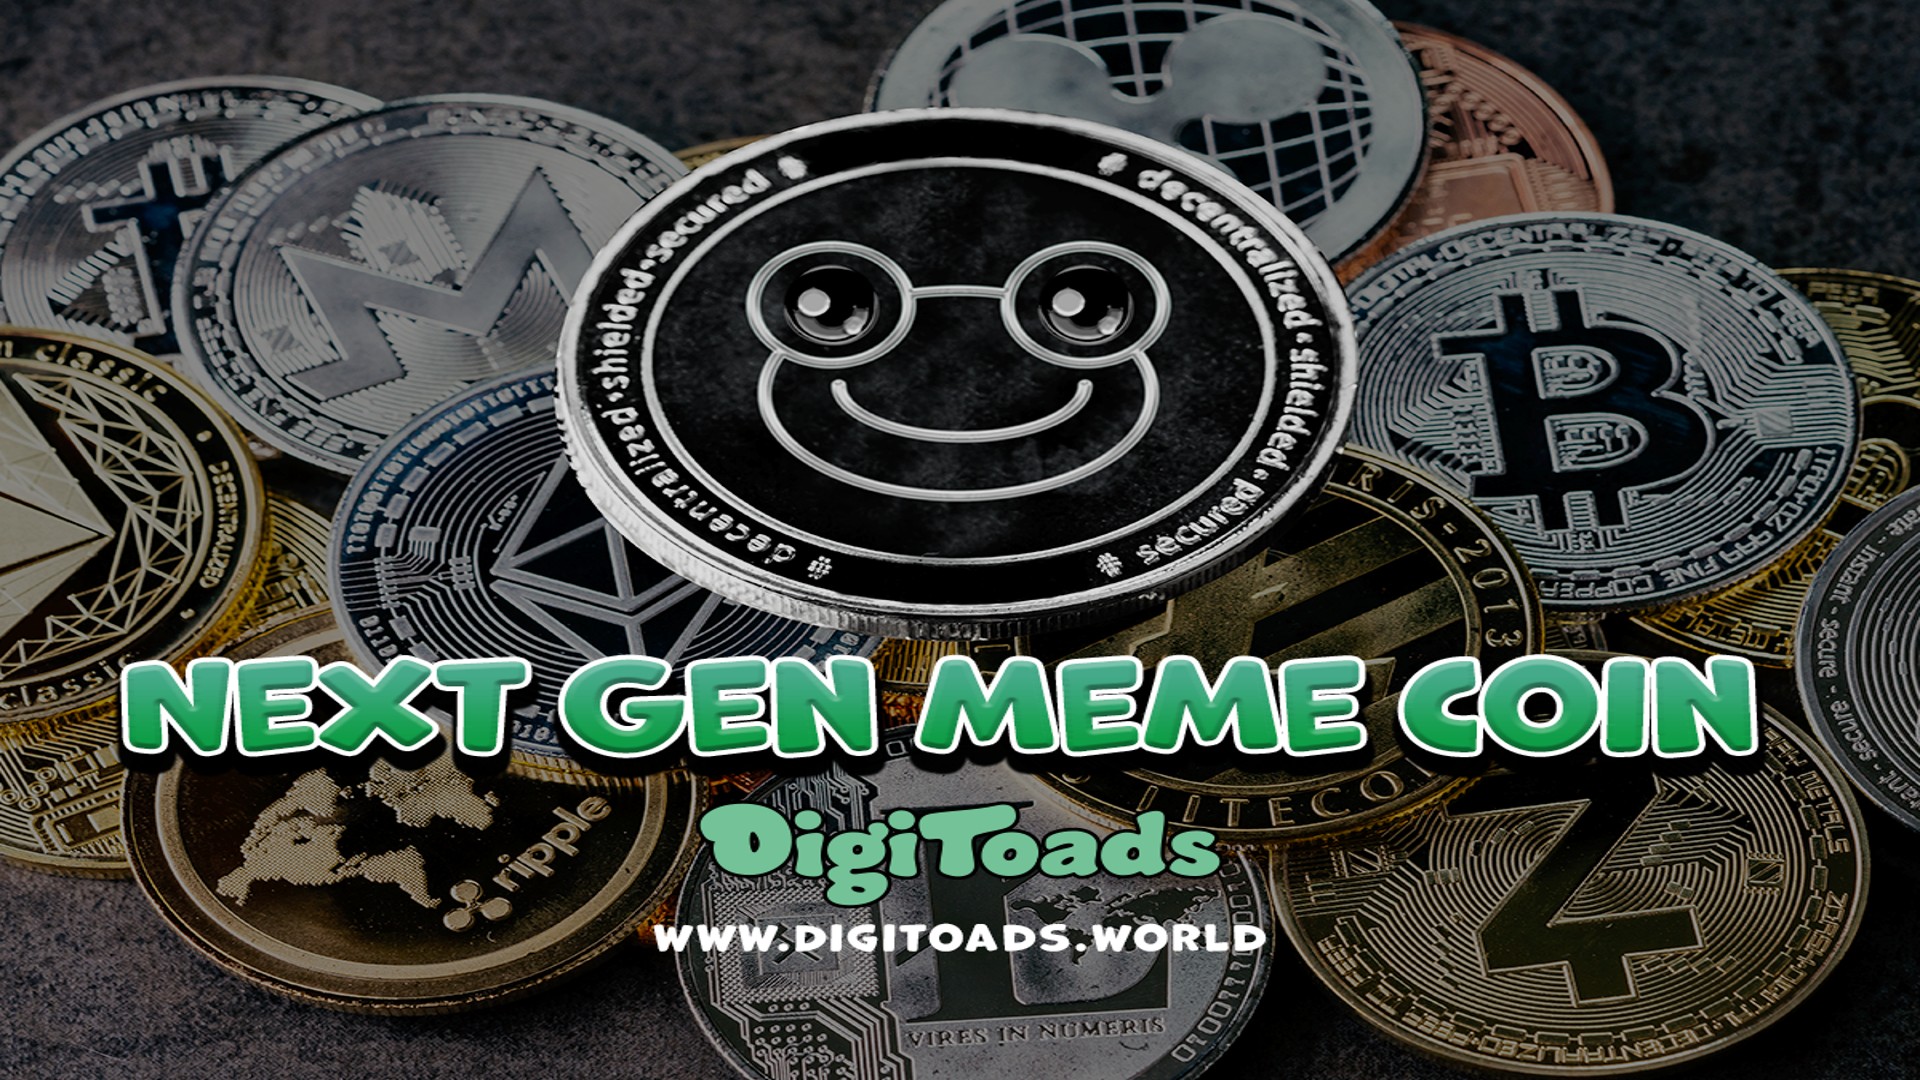 Despite the success of Pepe memecoin, DigiToads (TOADS) has demonstrated impressive growth